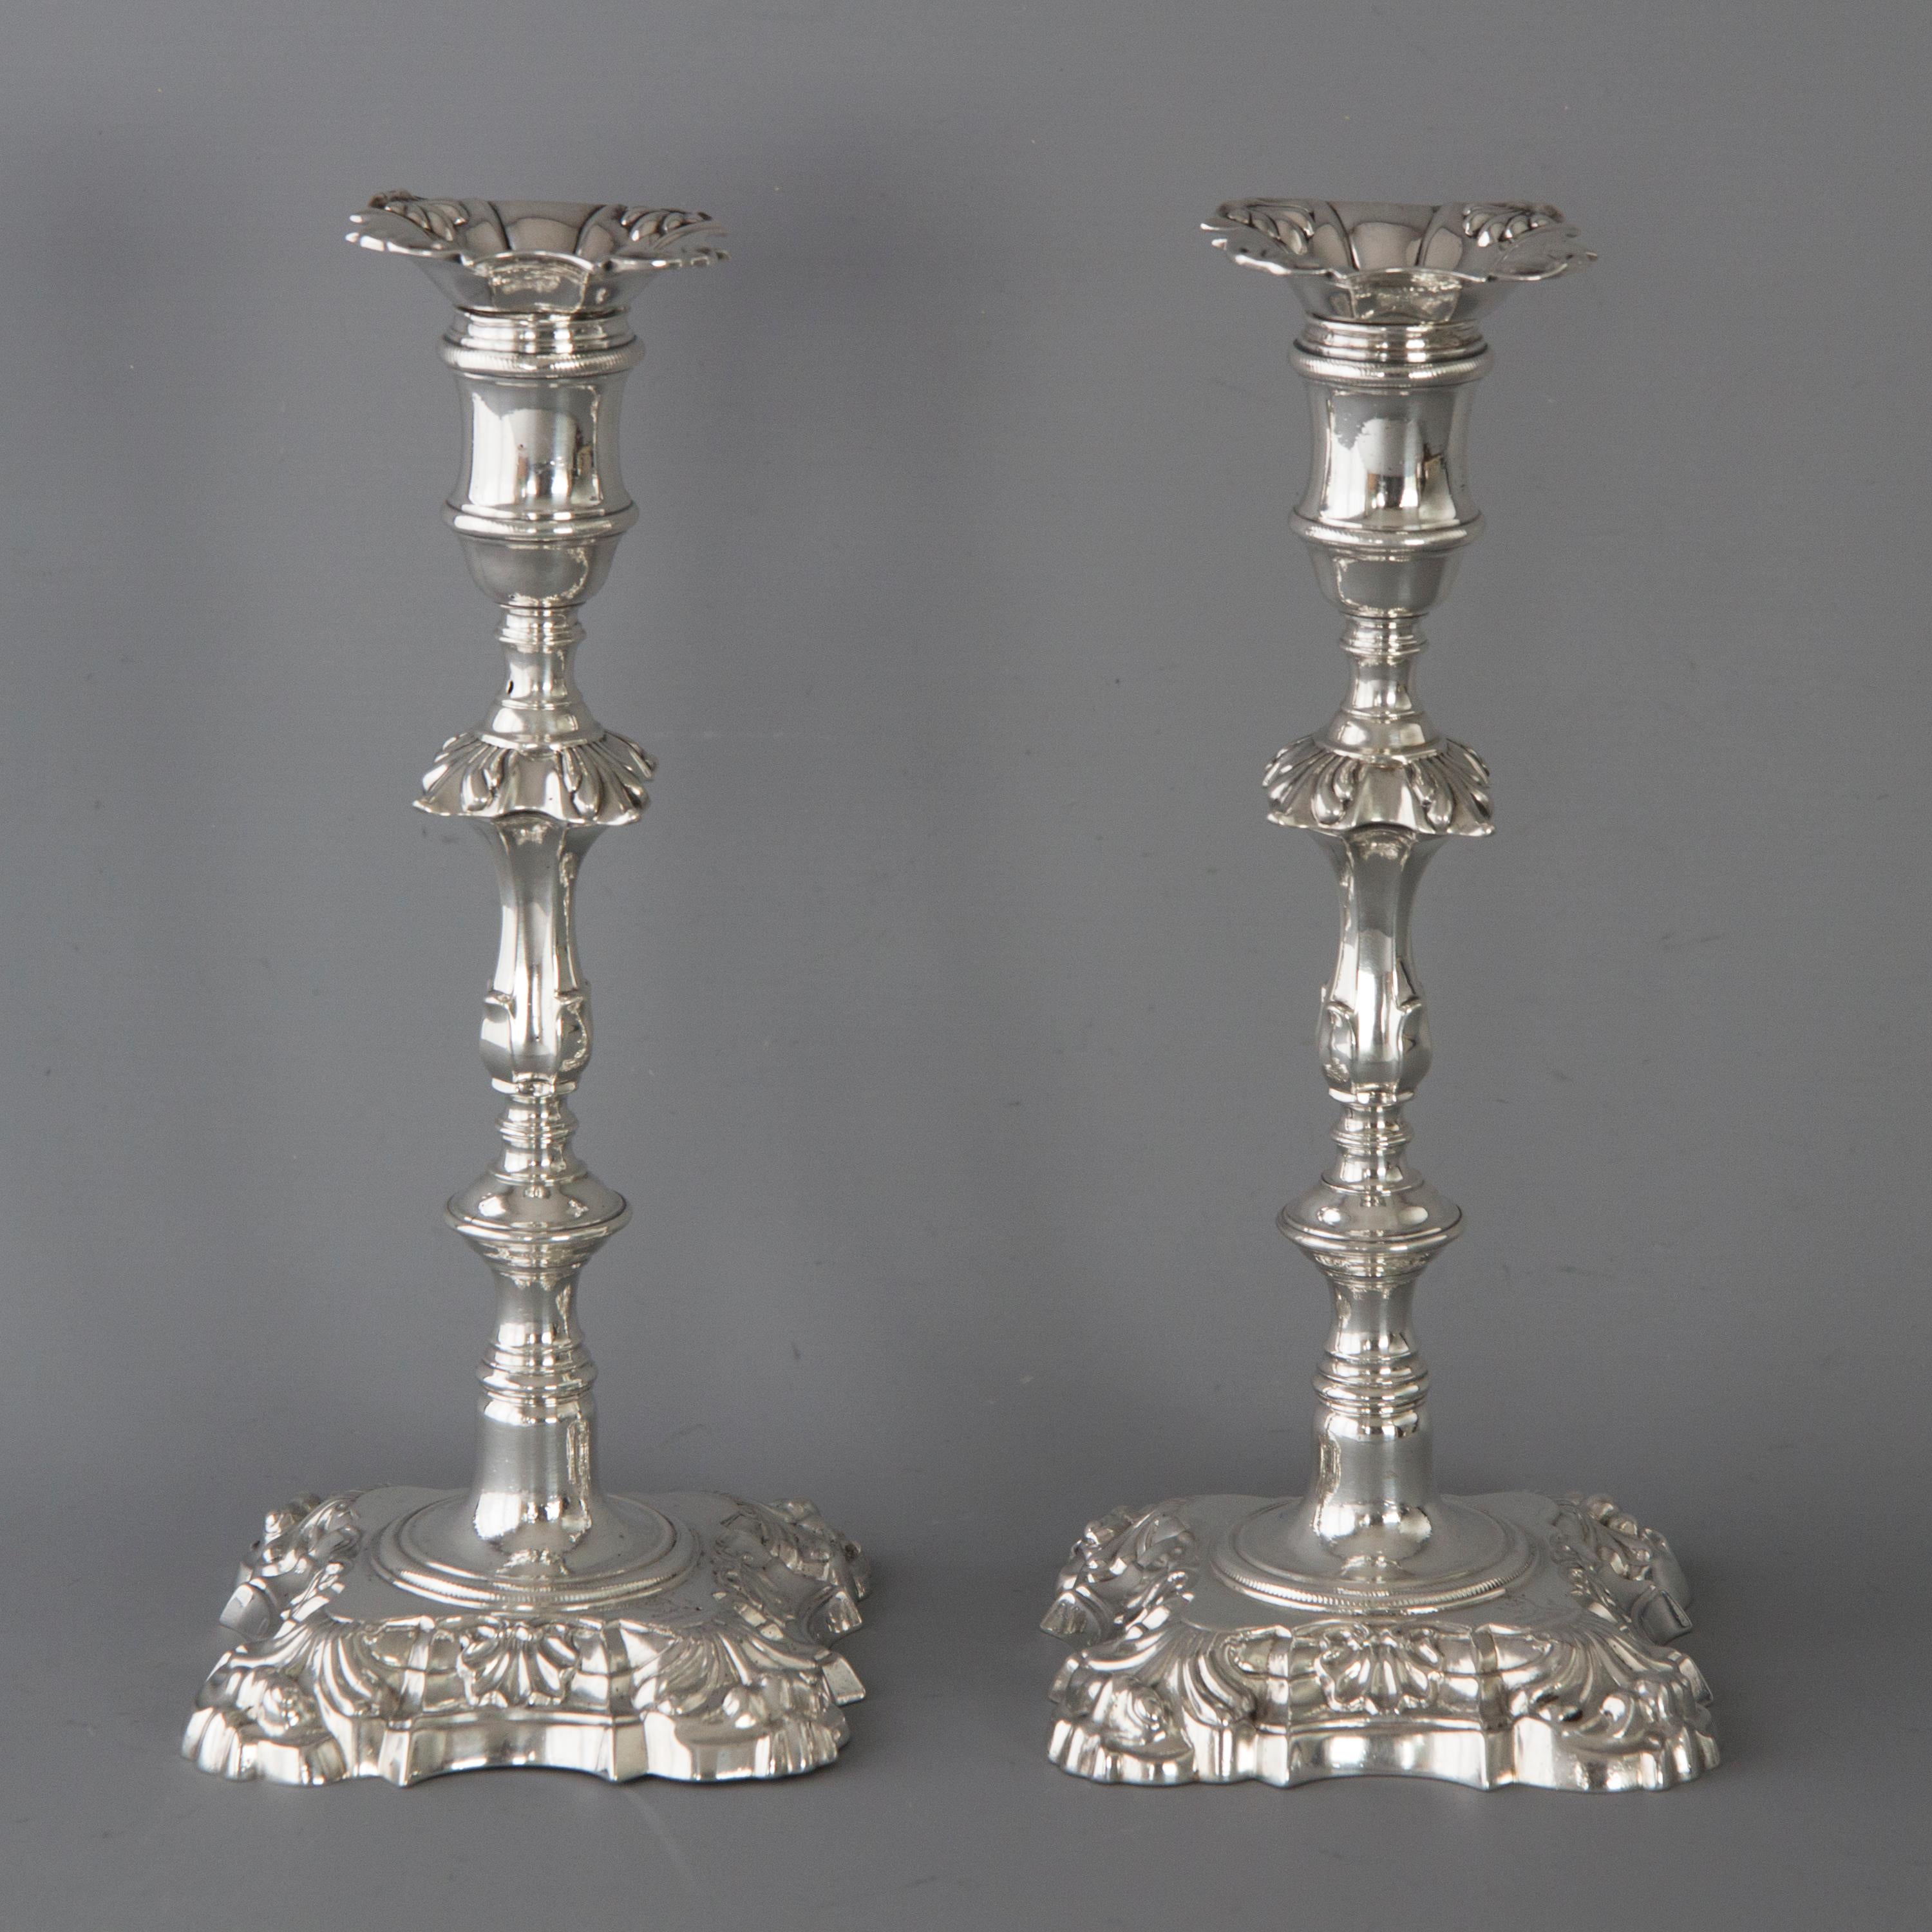 A very good pair of George III cast silver table candlesticks of shell and scroll decoration to a square shaped base. The stem with a circular knop and a fluted rectangular knop. Rope twist decoration to the base and capitals. Conforming shell